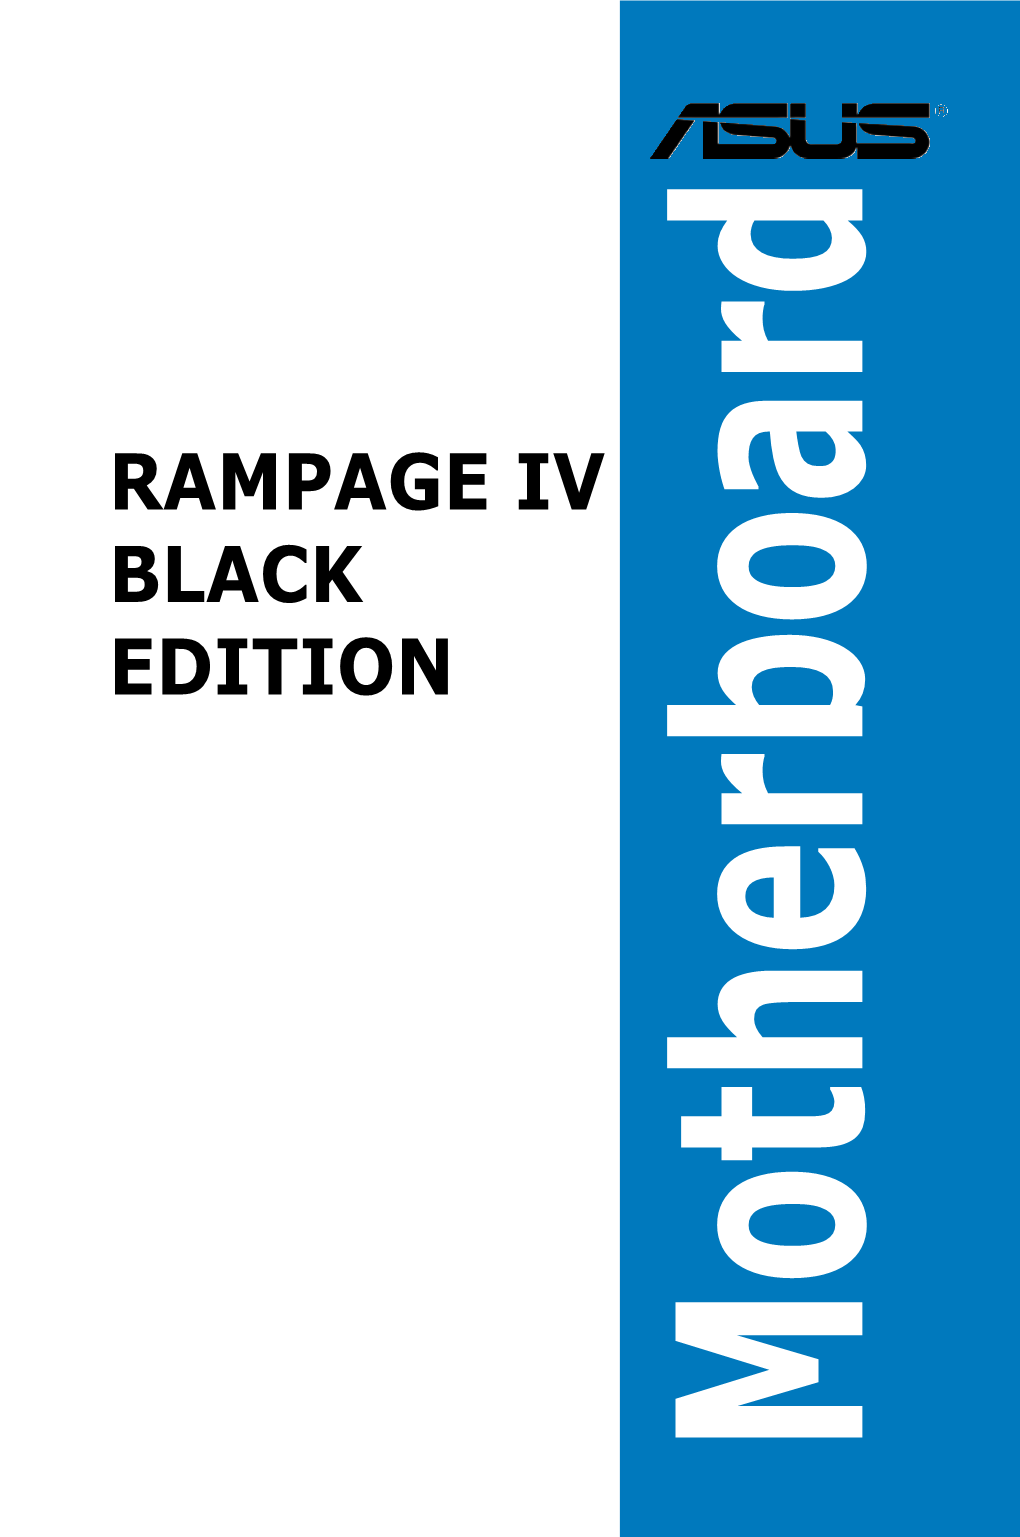 RAMPAGE IV BLACK EDITION Specifications Summary